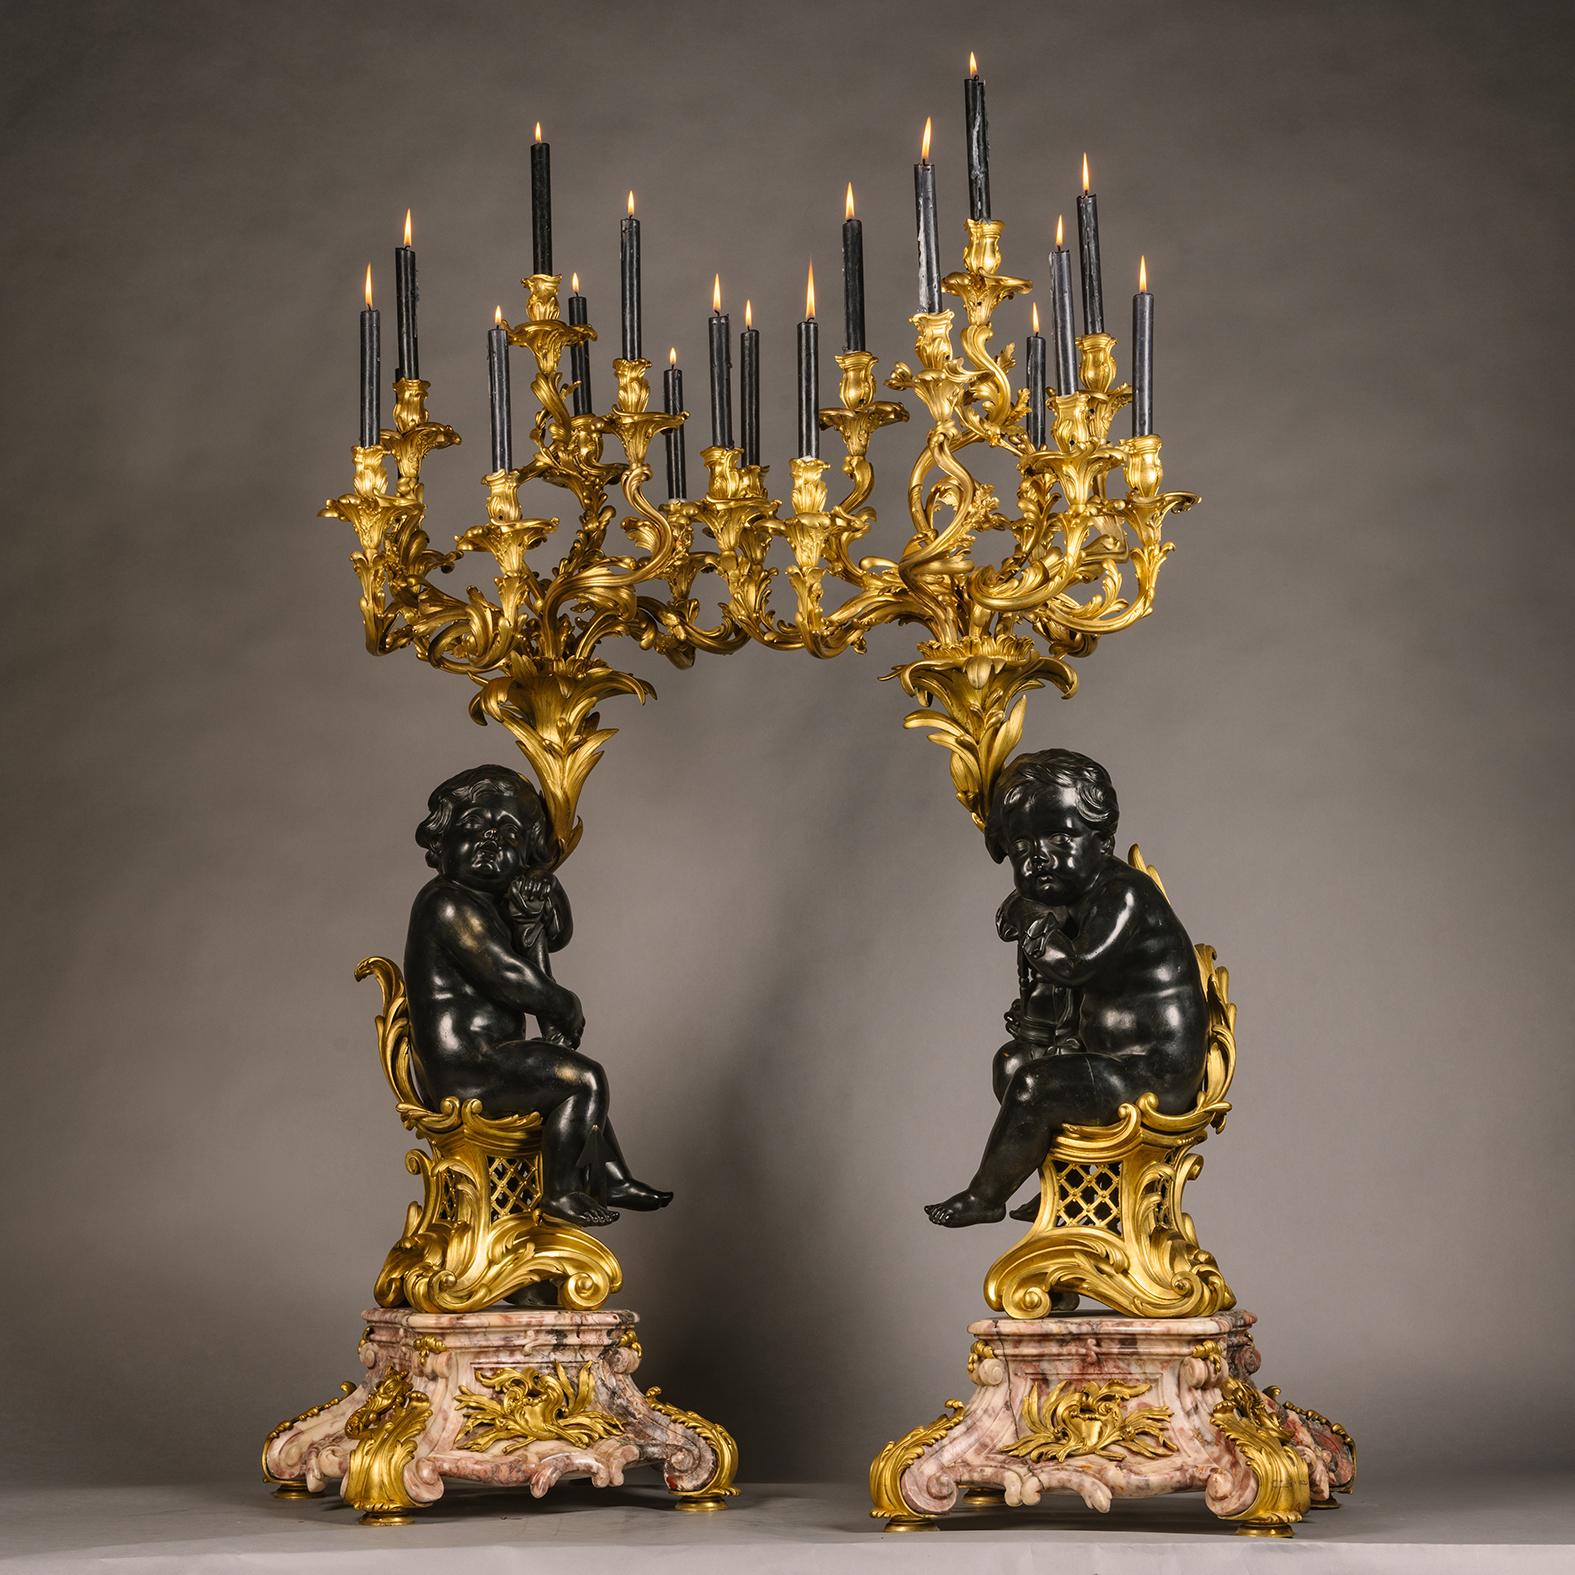 A pair of Large Louis XV Style Gilt and Patinated Bronze and Marble Figural Candelabra. 

Each modelled with naturalistically cast rocaille and laurel leaf candle branches above cherubs, one holding an anchor and the other an hourglass, seated on